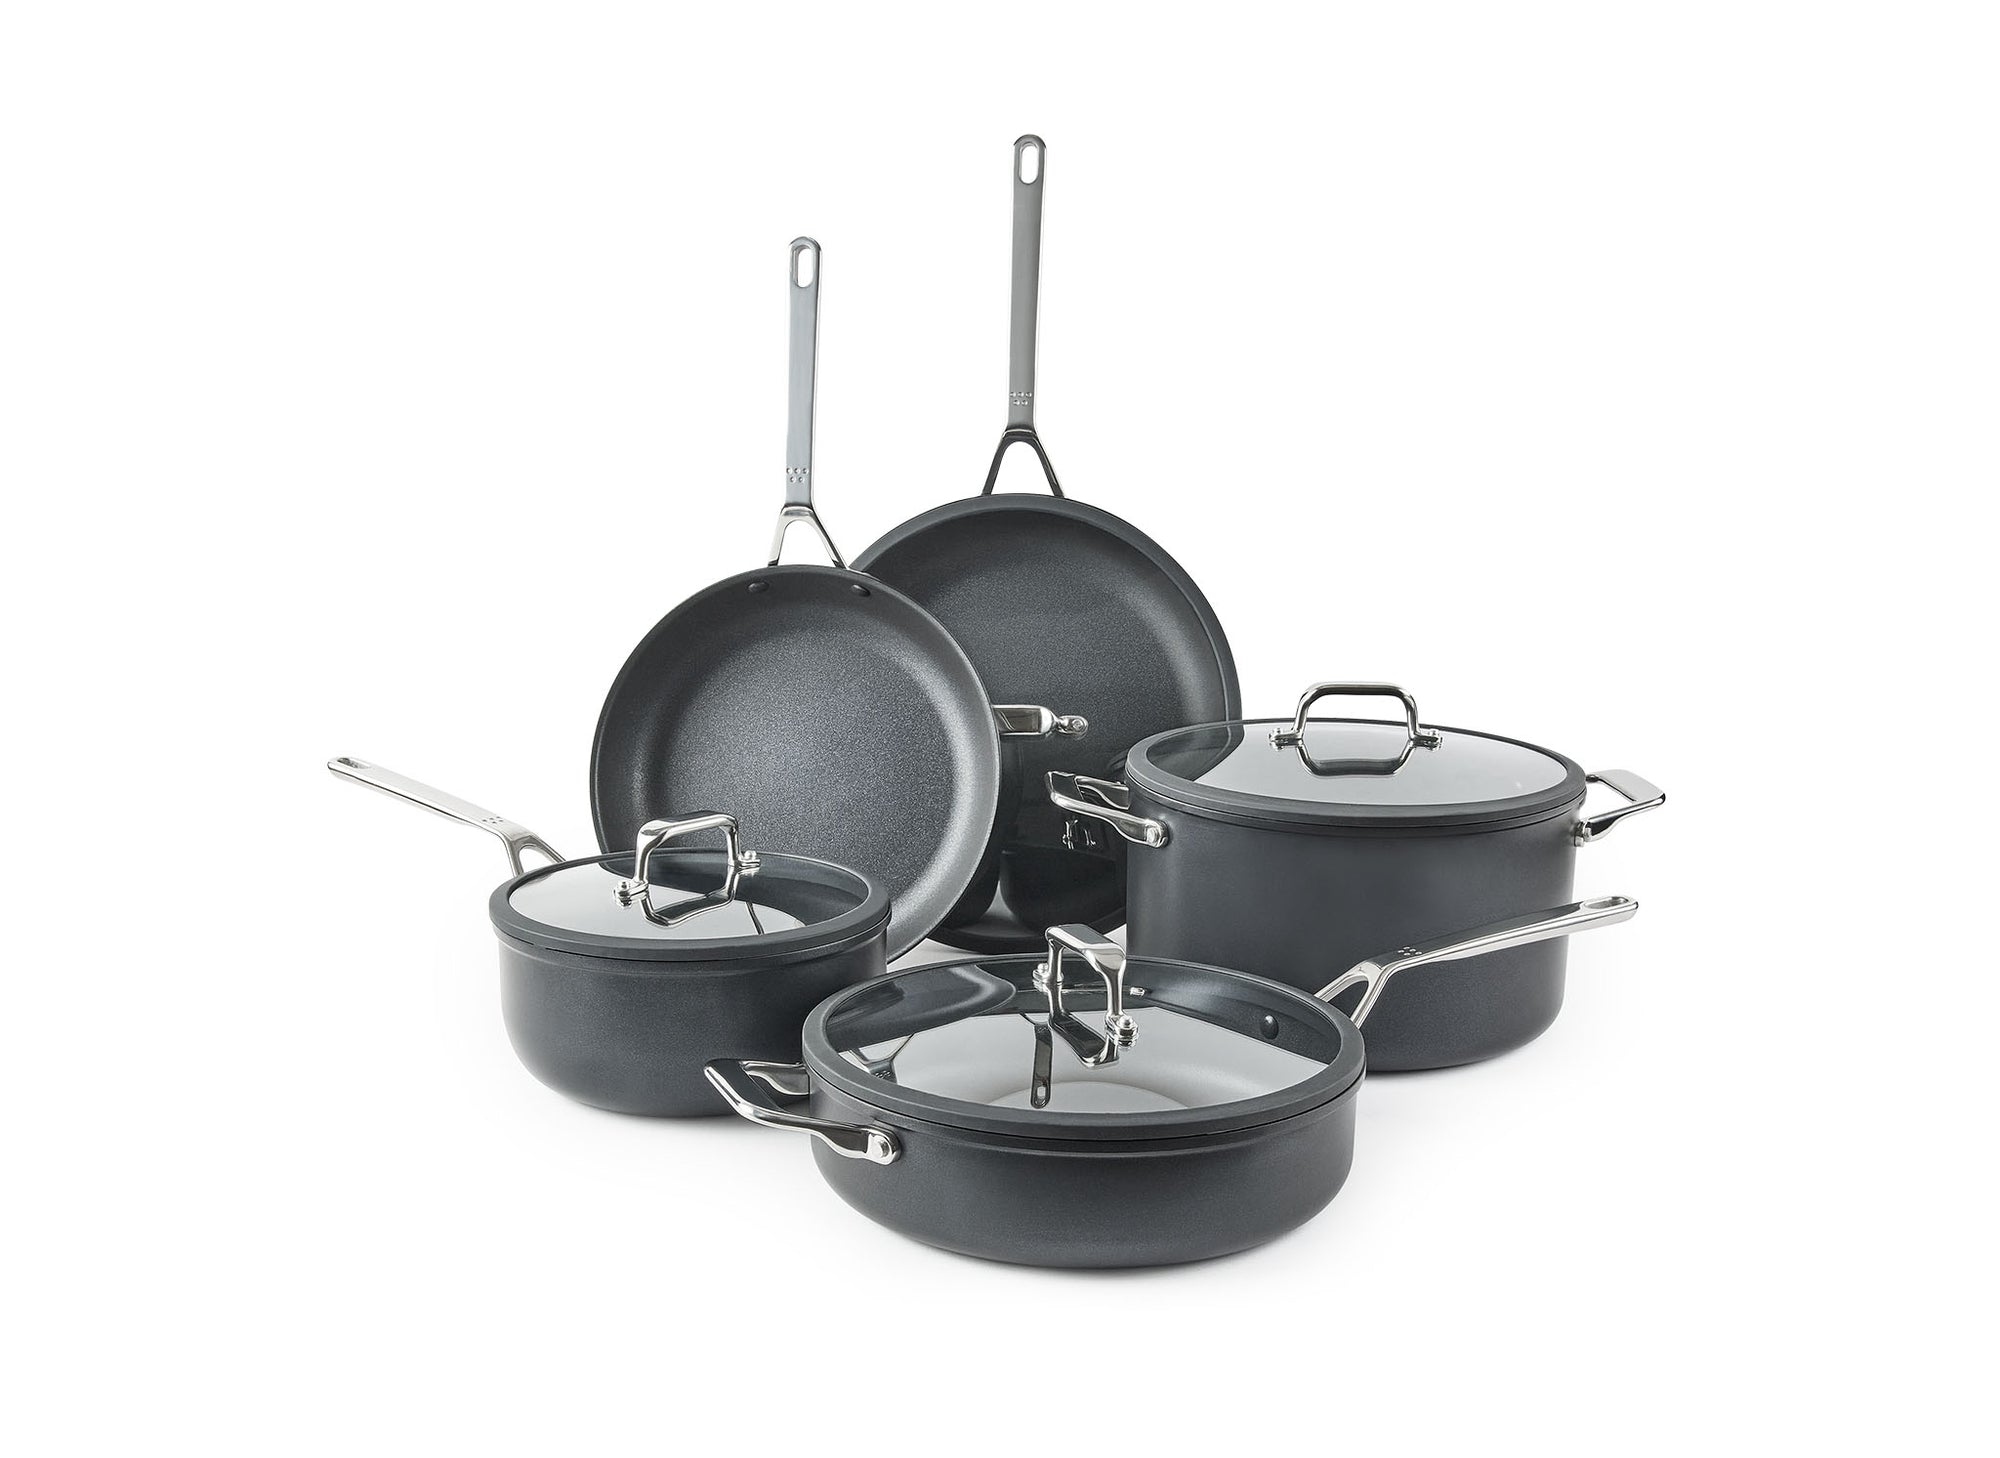 The Misen 9-Piece Essentials Cookware Set on a white background, with most pieces visible: the 10- and 12-inch Nonstick Pans, Nonstick Stock Pot, Nonstick Sauté, and Nonstick Saucier, with lids.